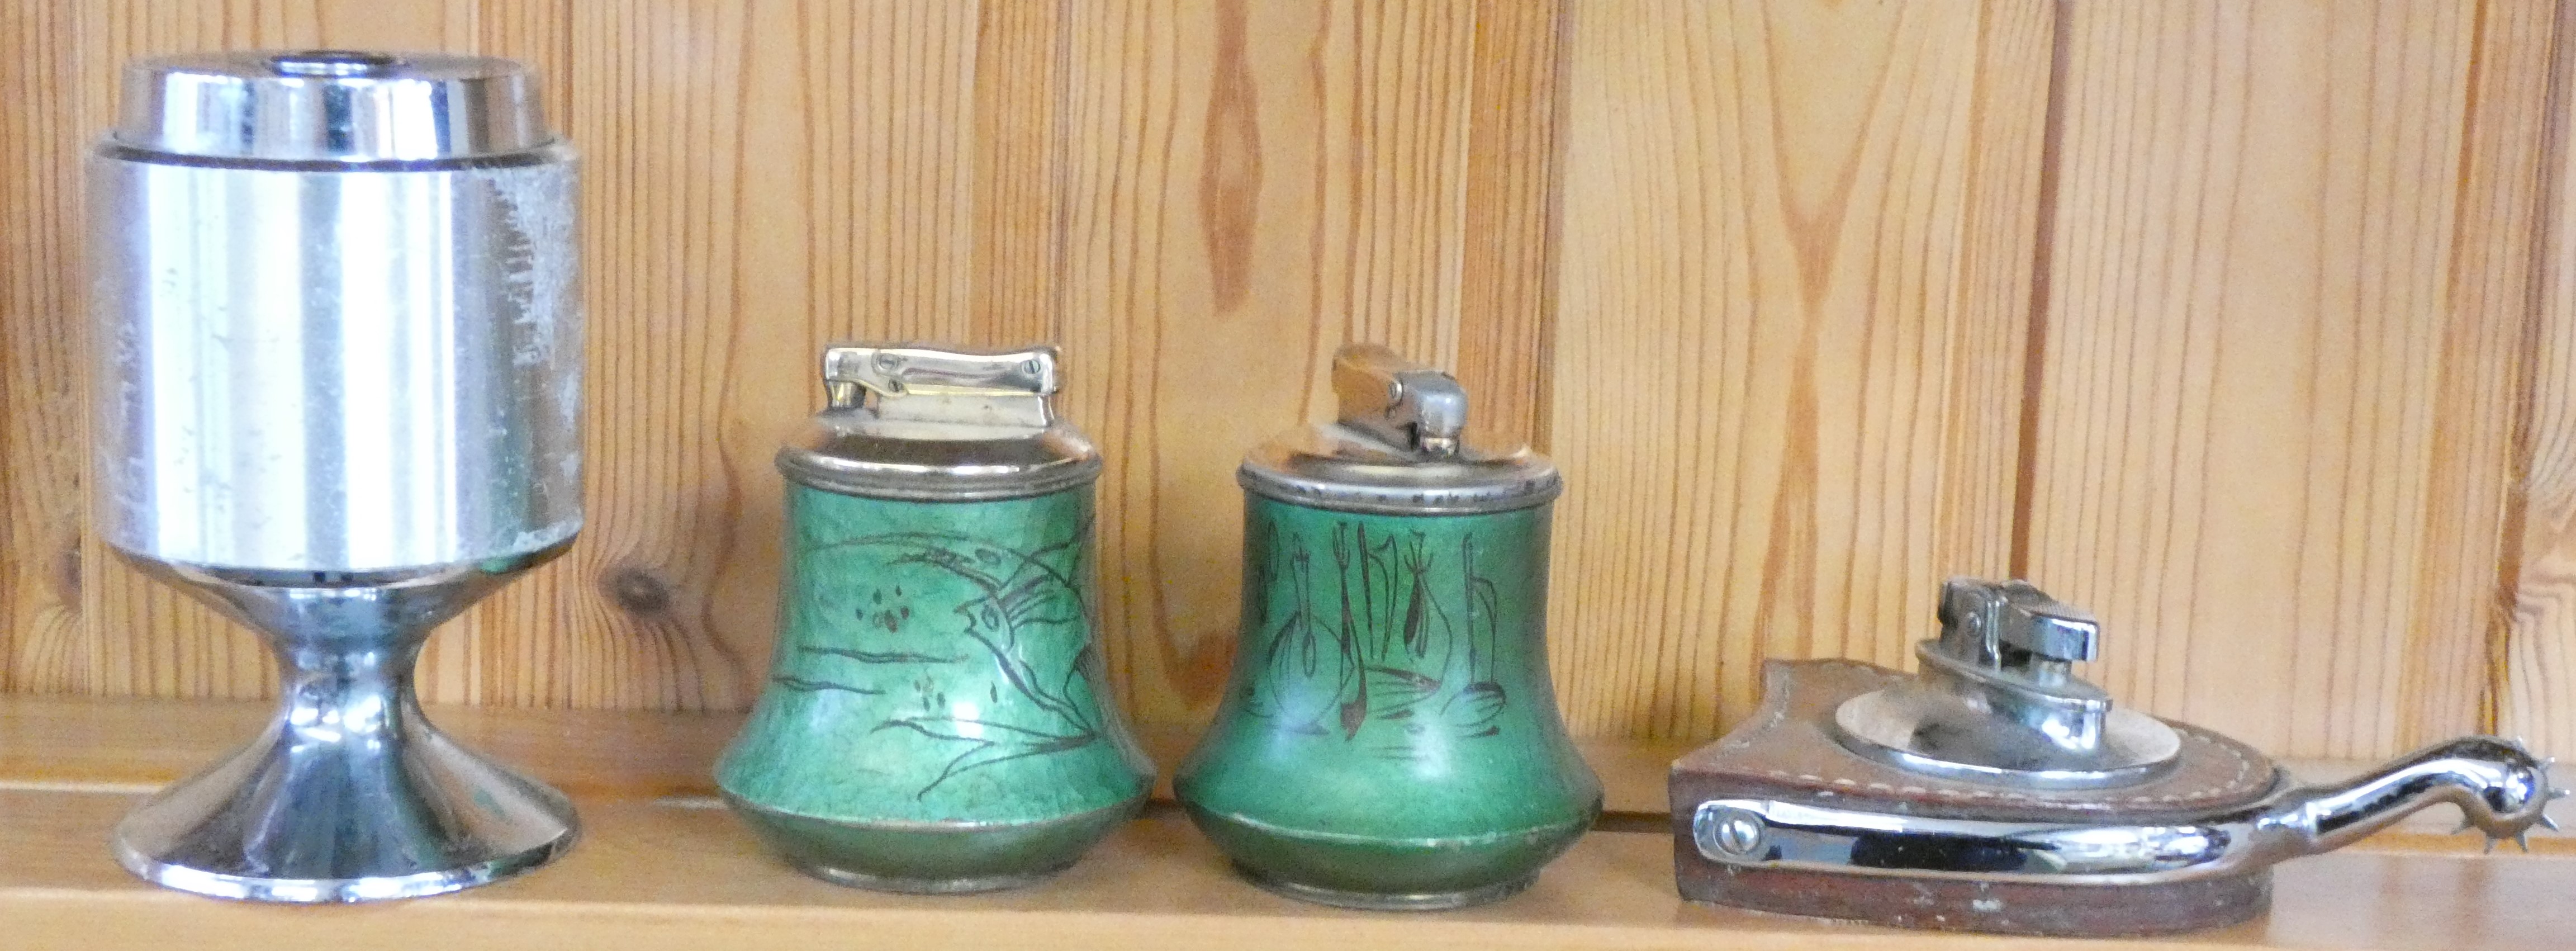 A Rolstar equestrian spur table lighter, a Colibri hammered enamel table lighter with fish